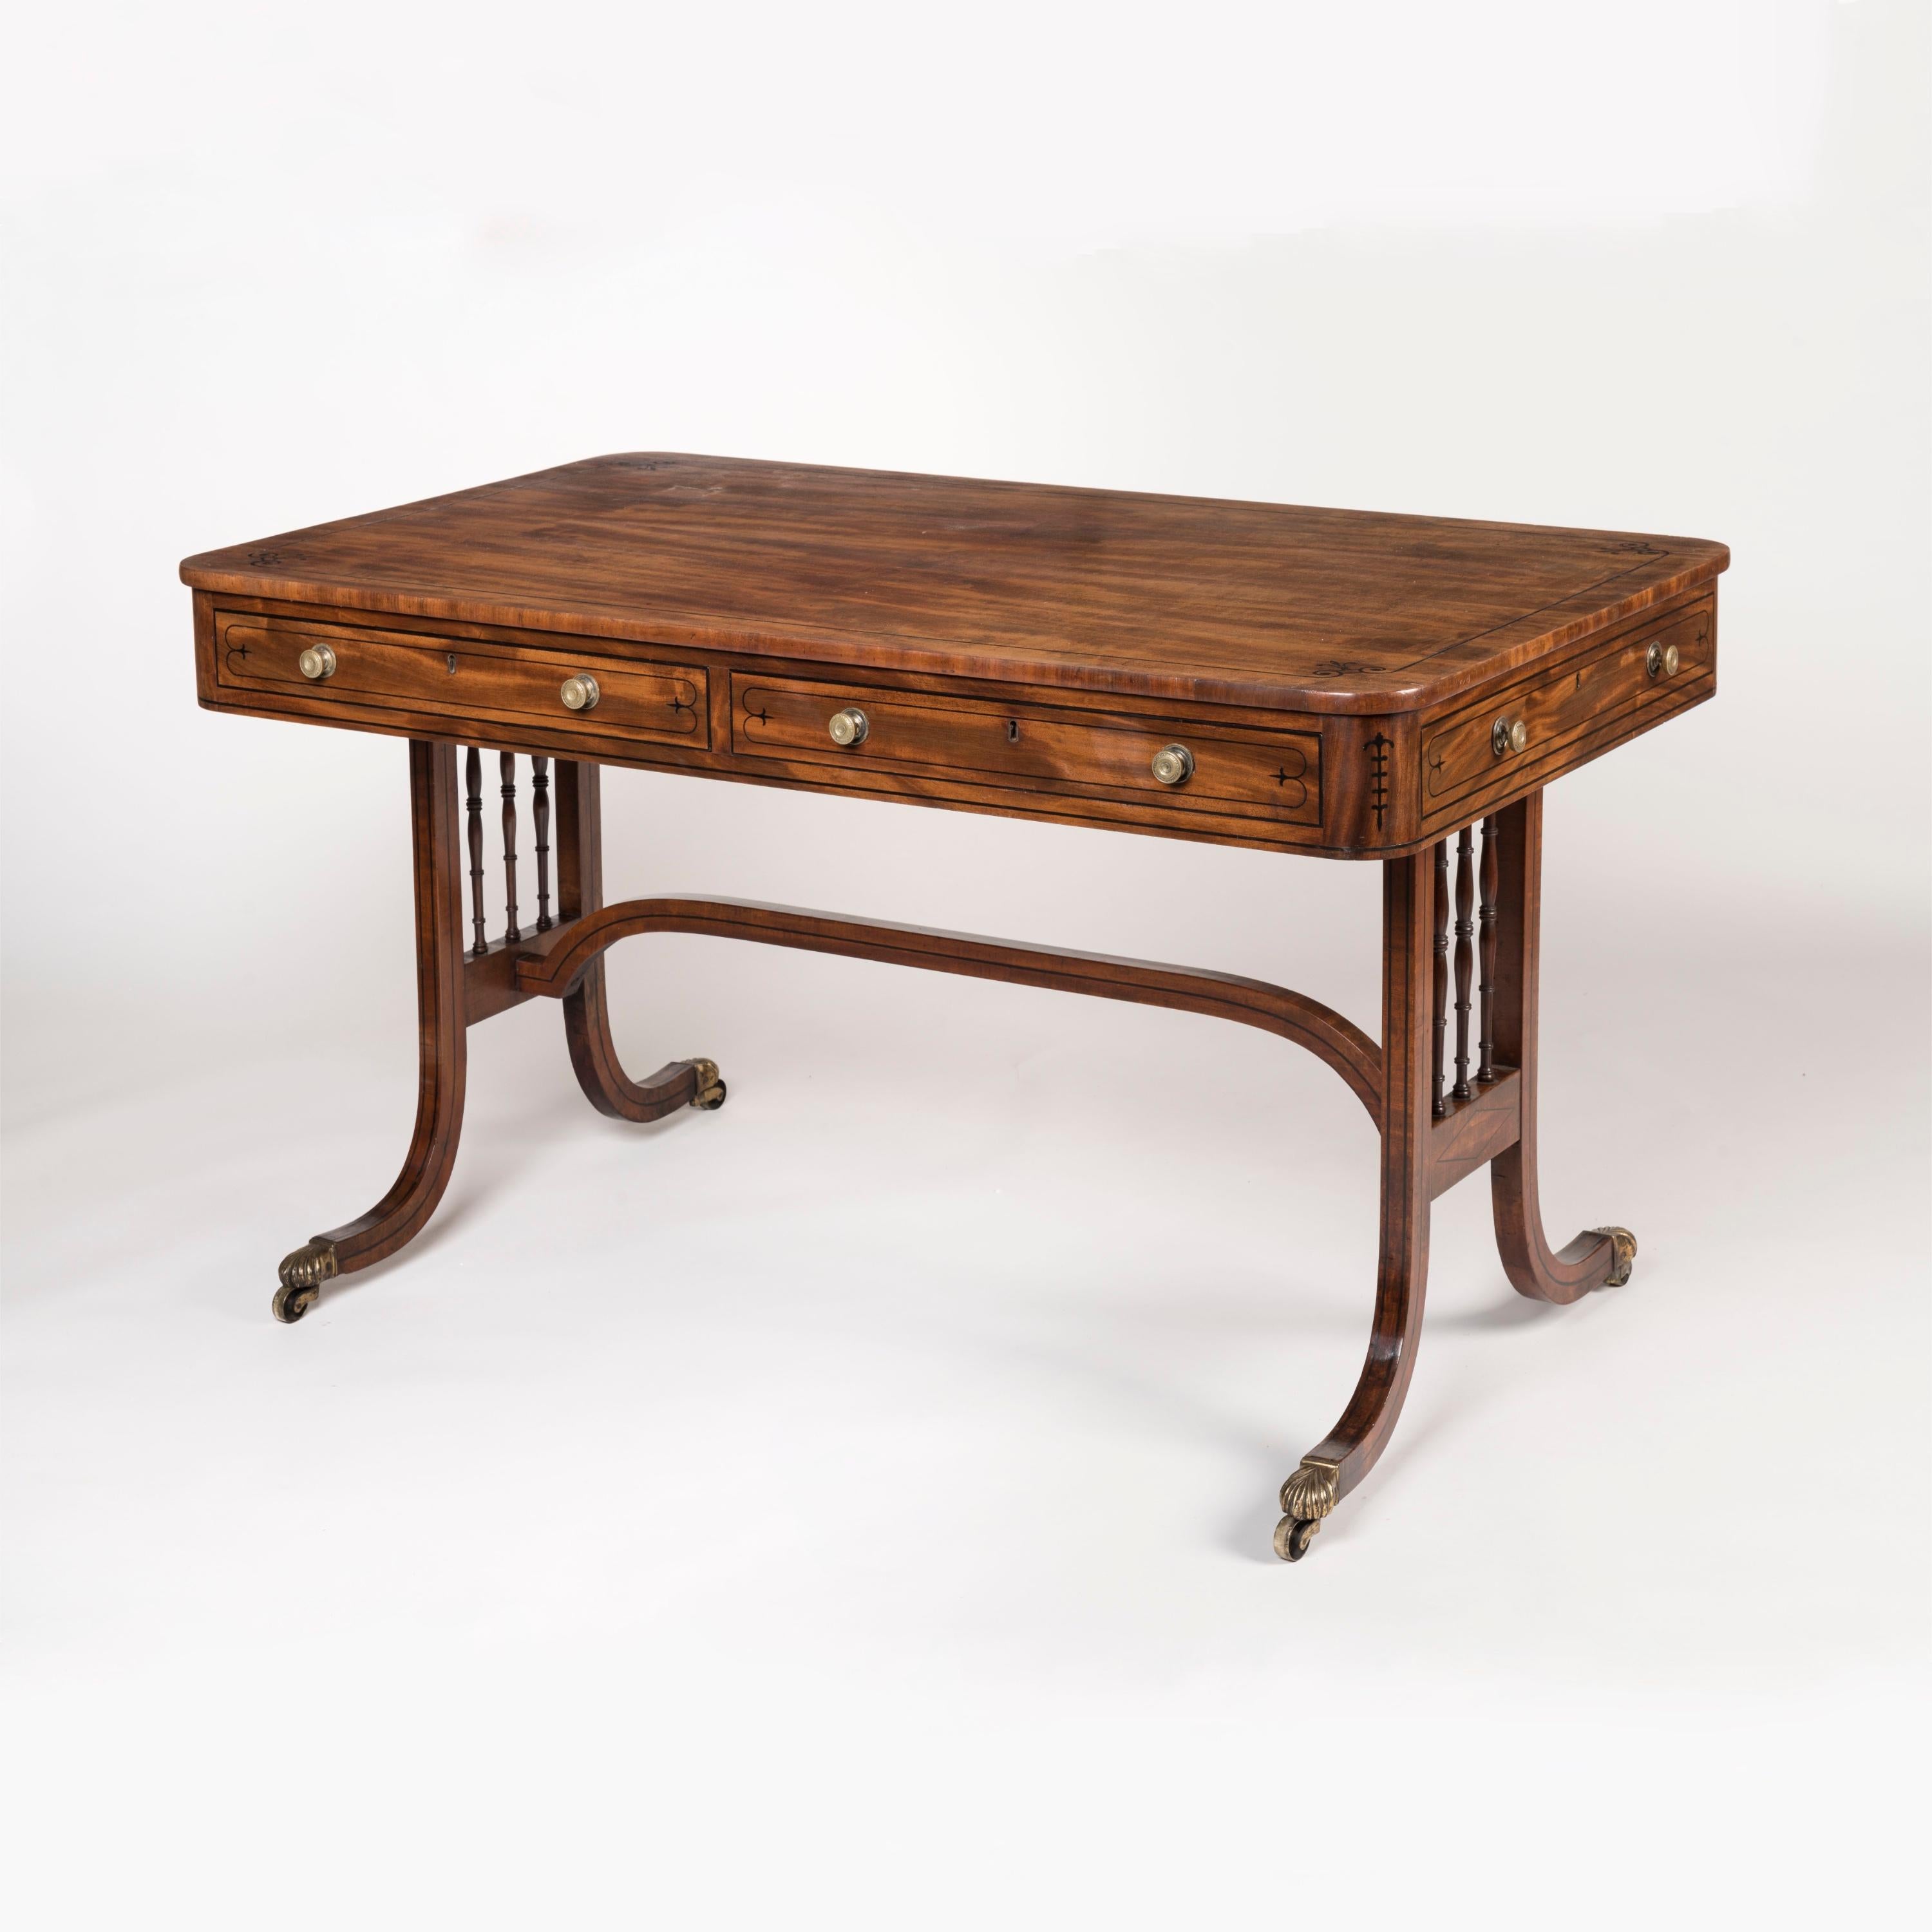 19th Century Elegant English Regency Period Mahogany Table with Inlaid Details For Sale